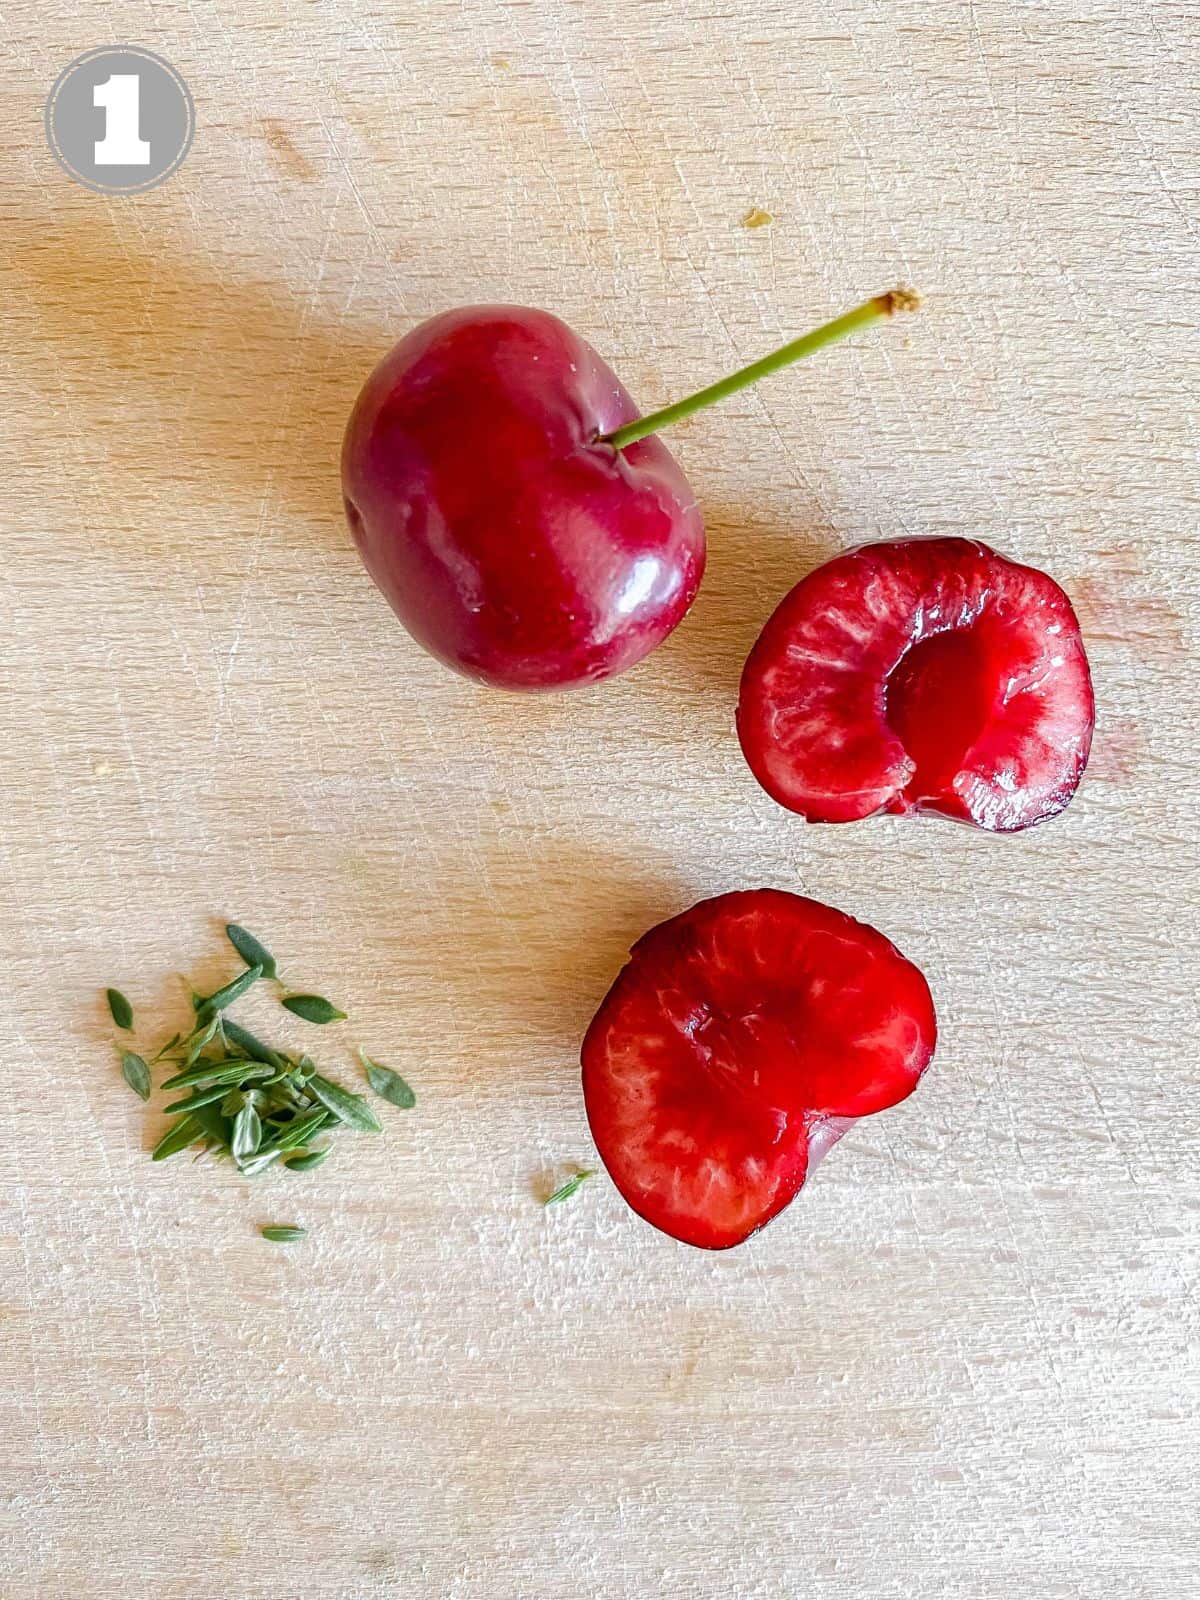 thyme leaves, a cherry and two halves of a cherry on a wooden board.